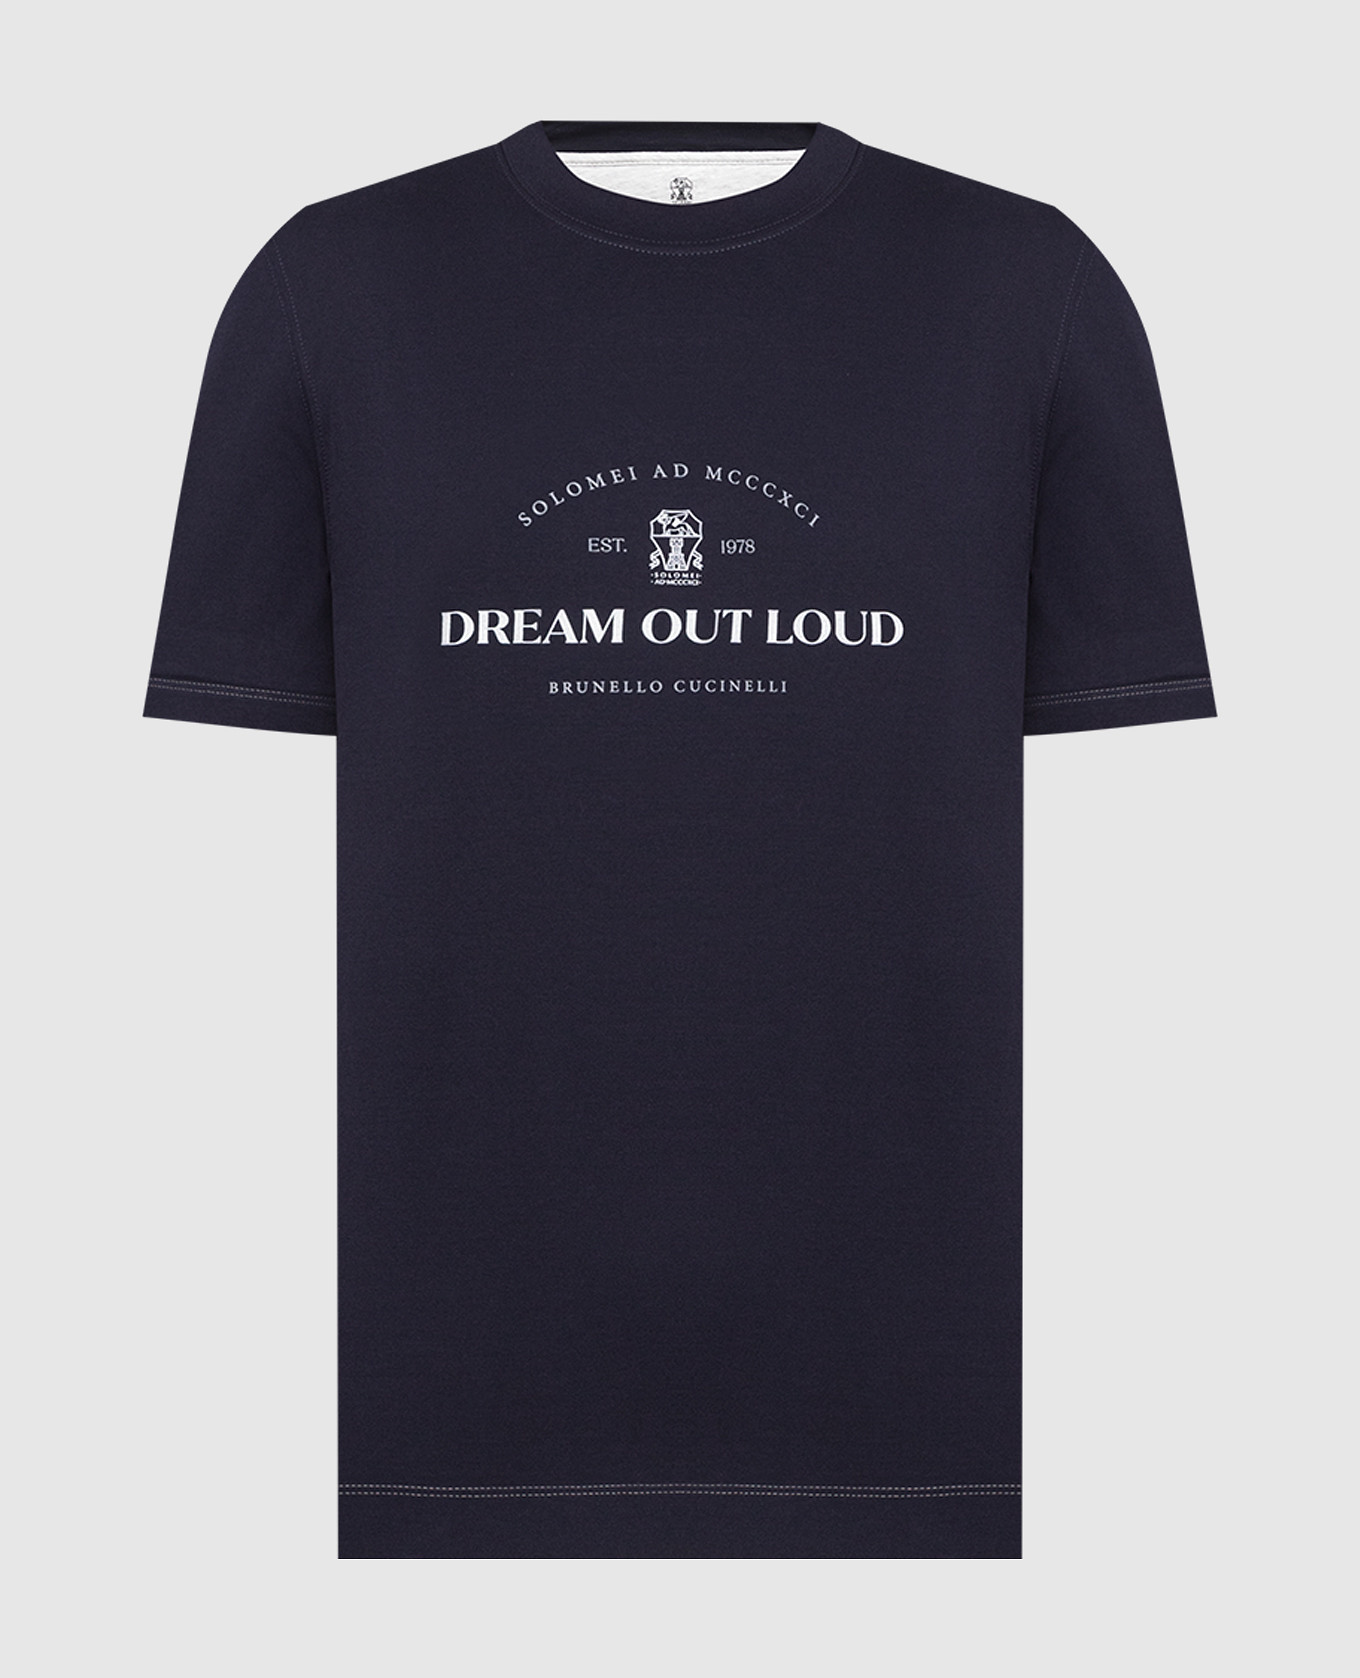 Blue t-shirt with Dream out loud print